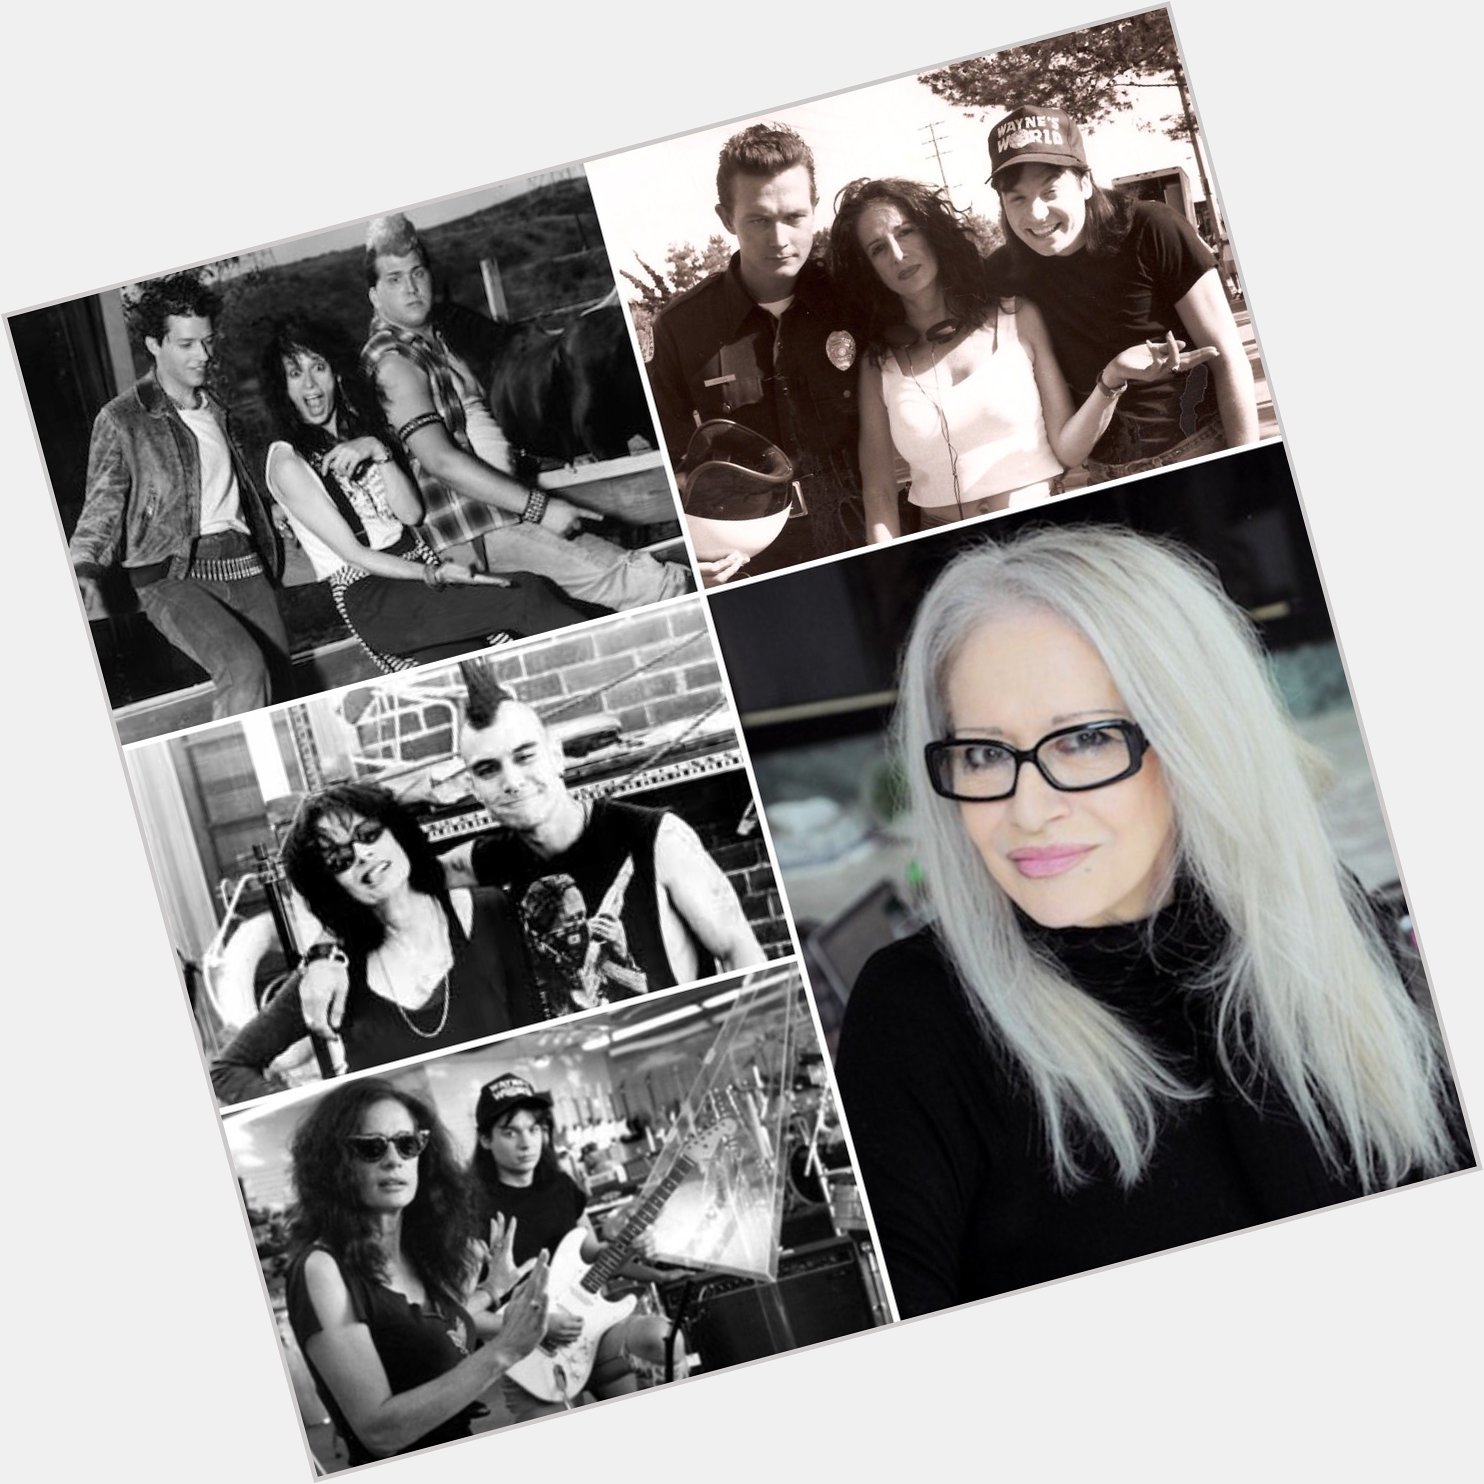 HAPPY BIRTHDAY TO THE PERPETUALLY COOL PENELOPE SPHEERIS! Let s get some pizza and watch DUDES 